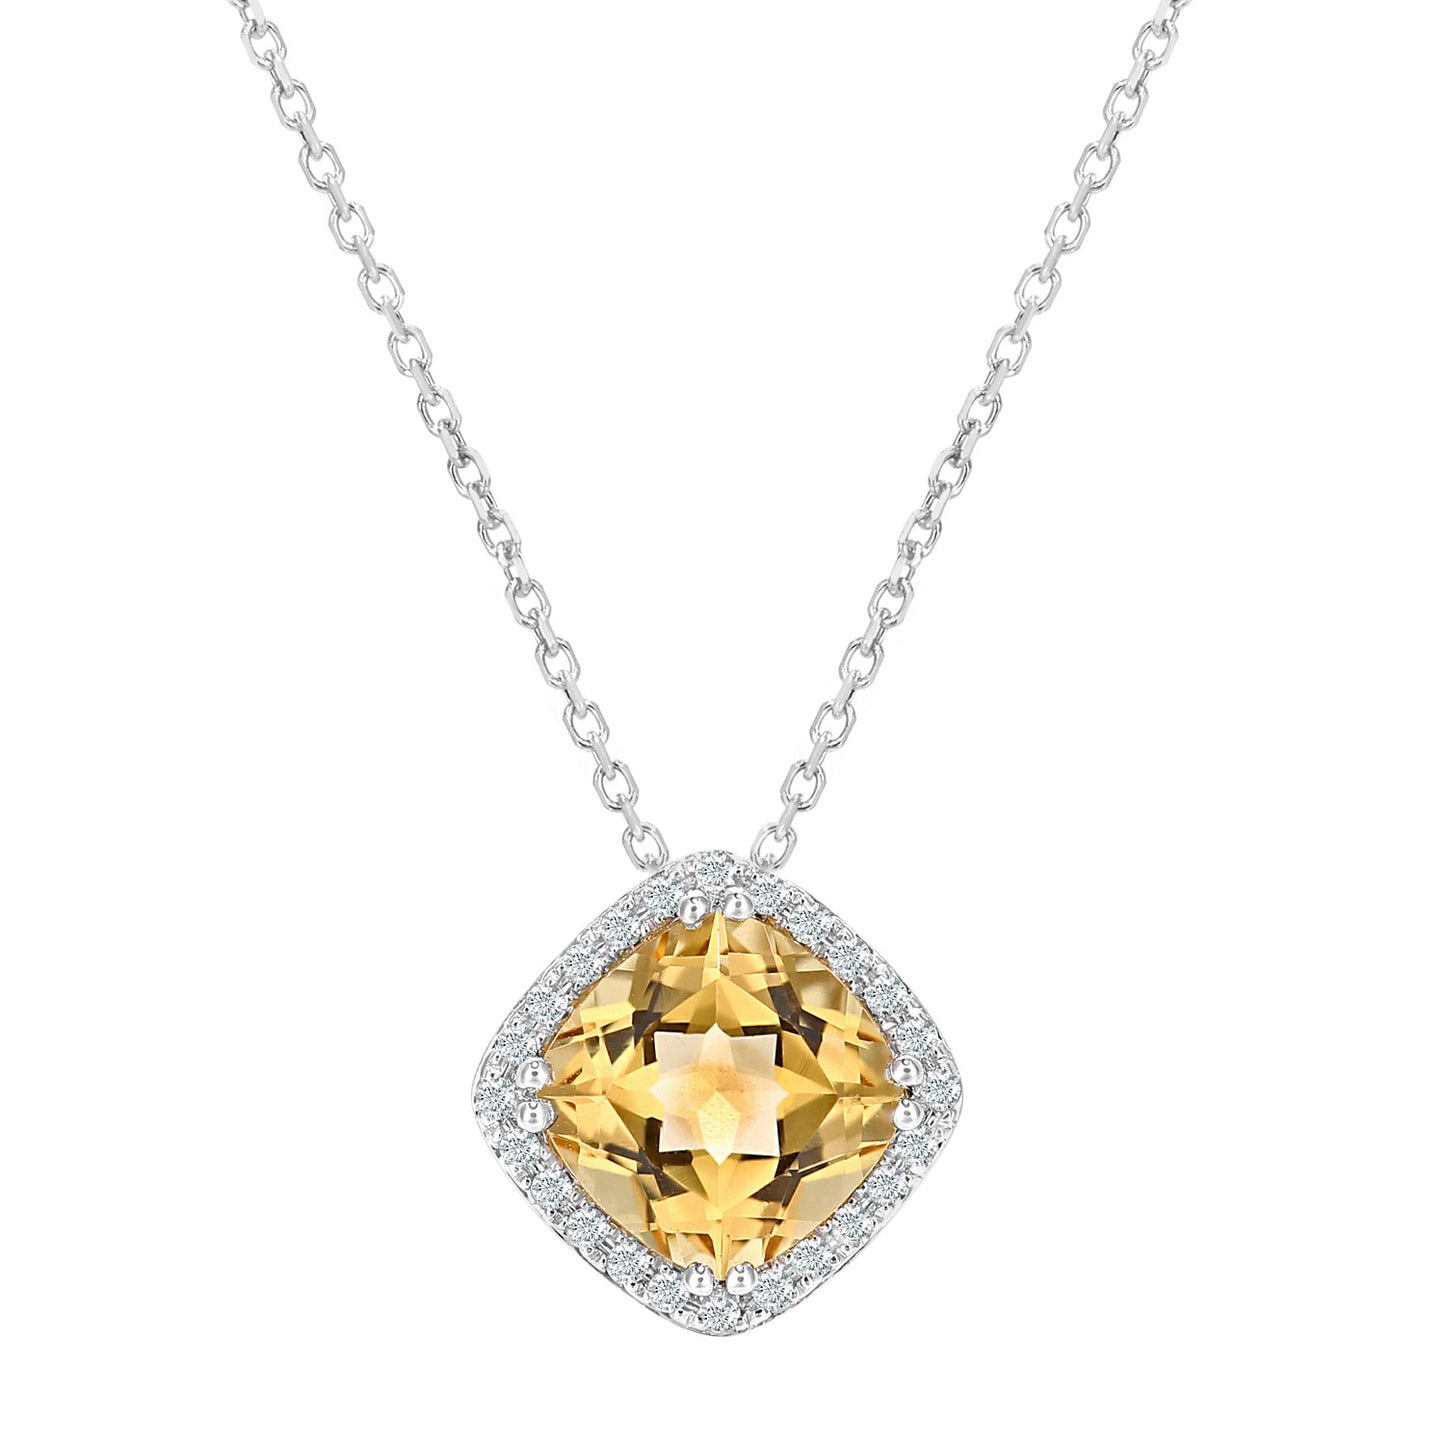 9ct White Gold  5pts Diamond Cushion 1.39ct Citrine Necklace 16" - DP1AXL681WCT